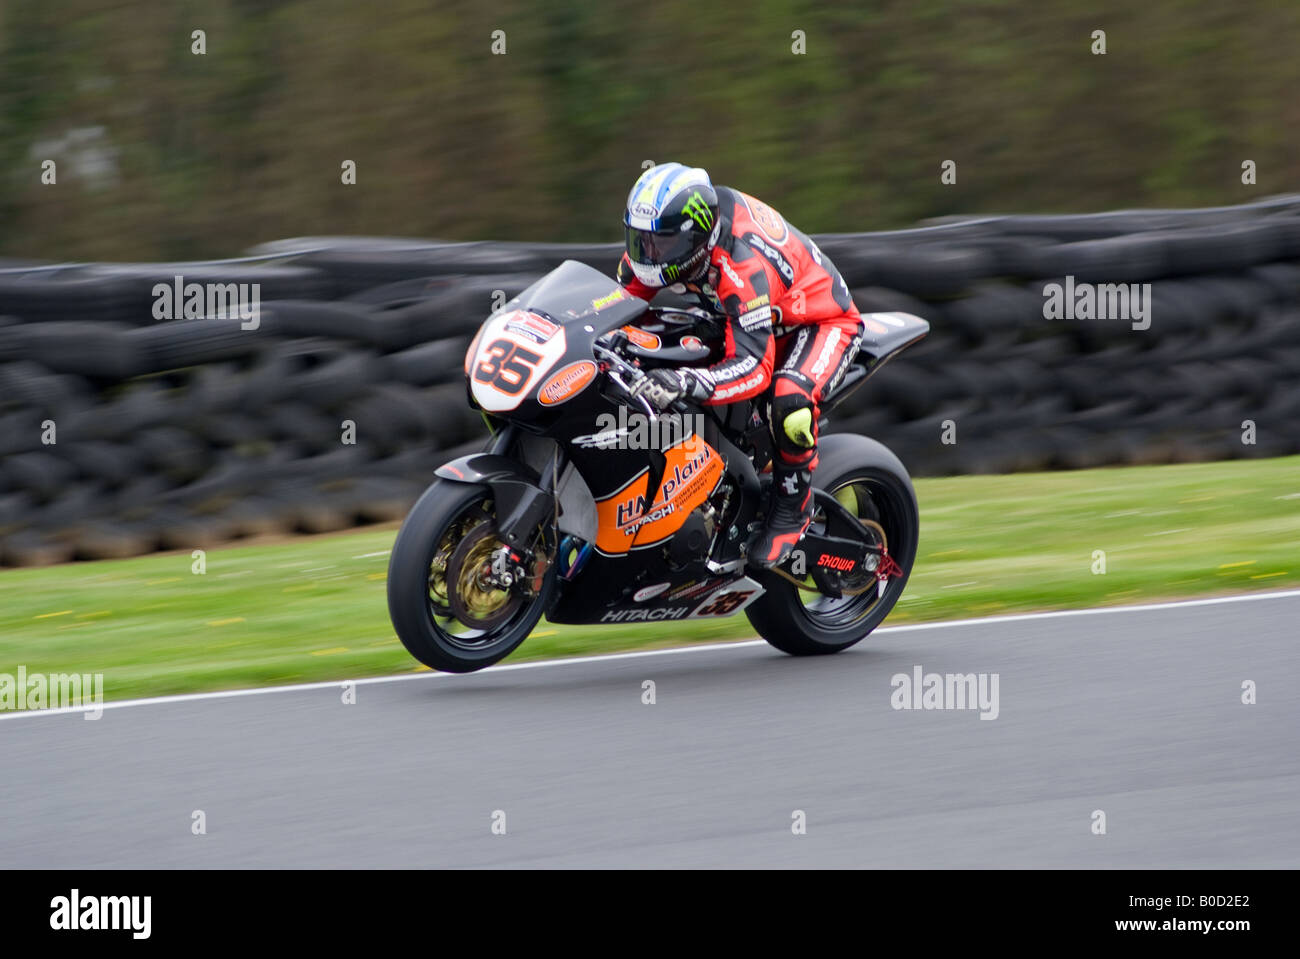 Cal Crutchlow Riding a Honda 1000 Motorbike in the British Superbike Championship at Oulton Park Cheshire England United Kingdom Stock Photo